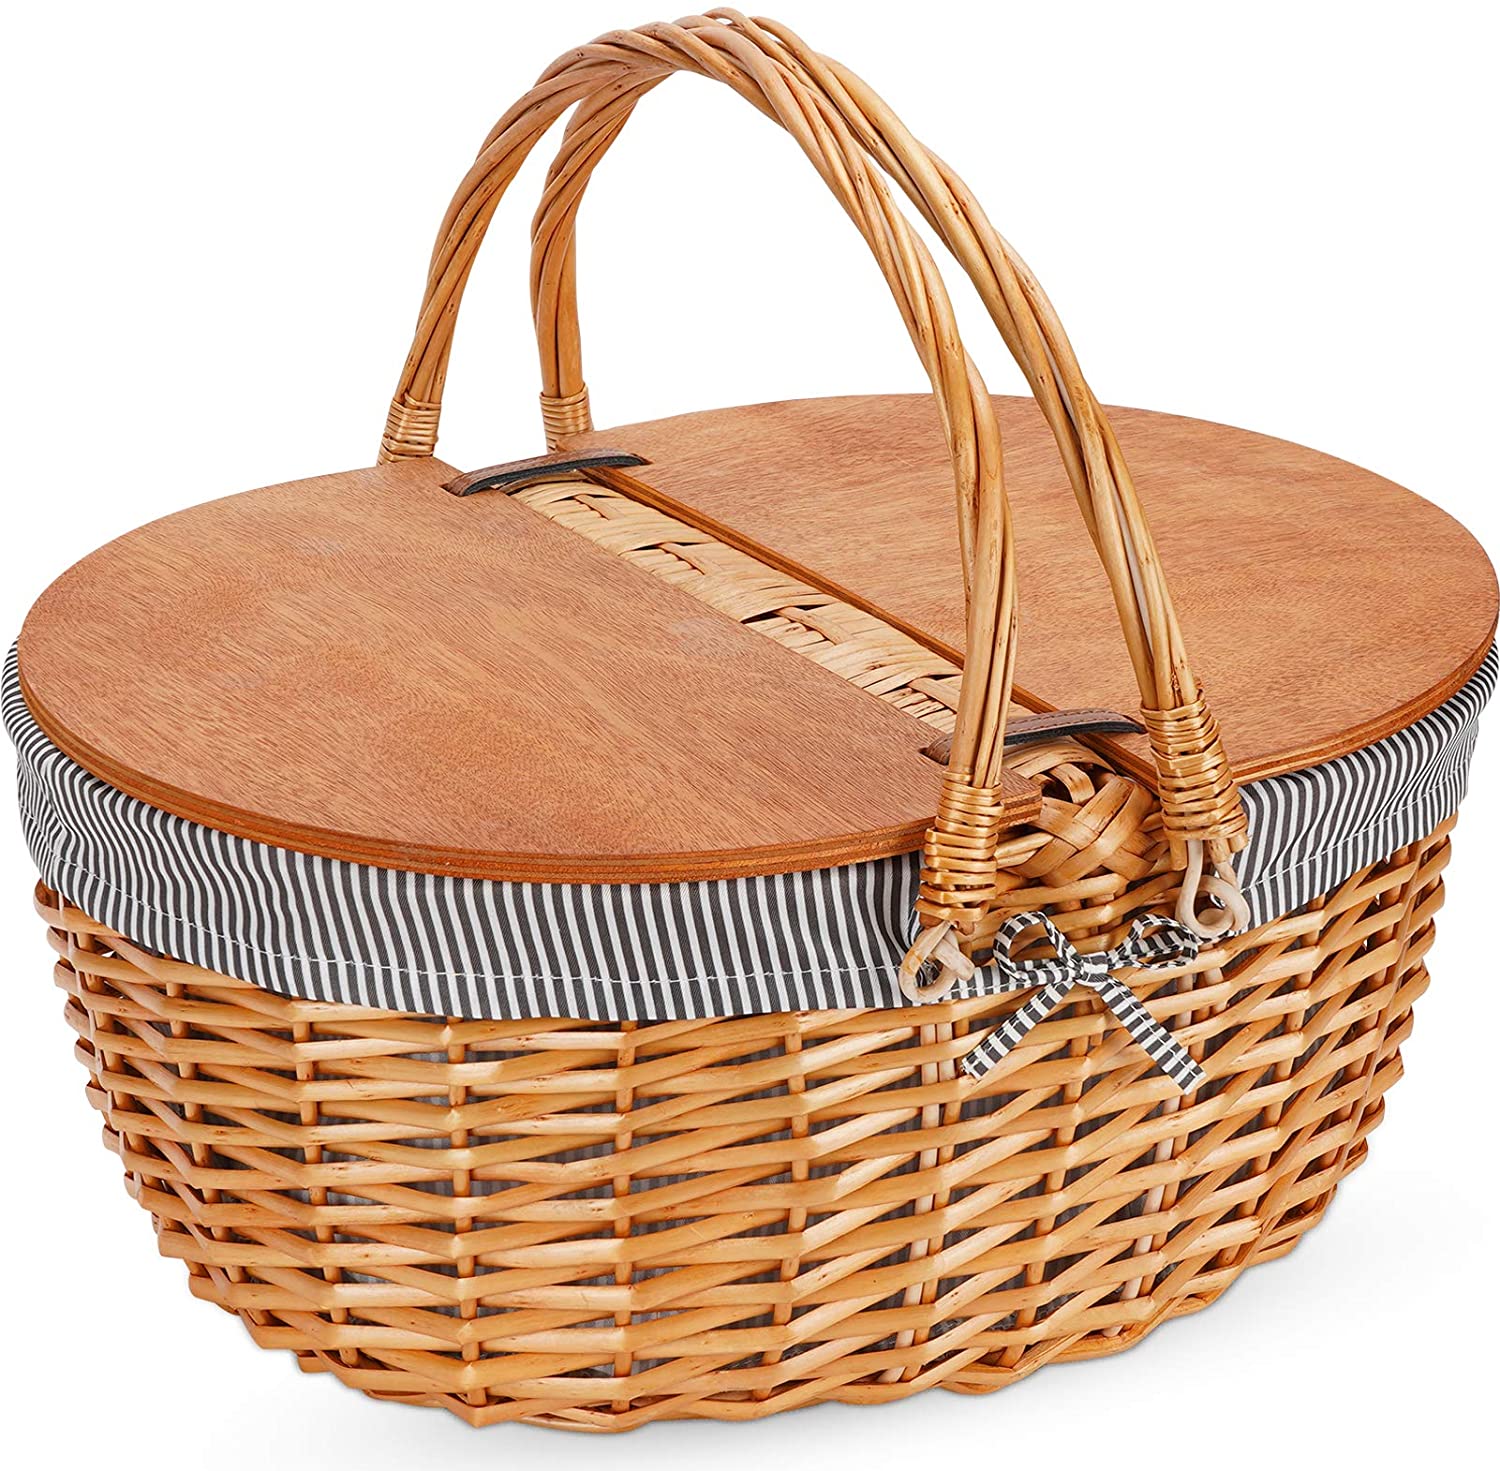 Classic Woven Picnic Basket, The 50 Best and Enticing Gifts for Grandparents in 2022